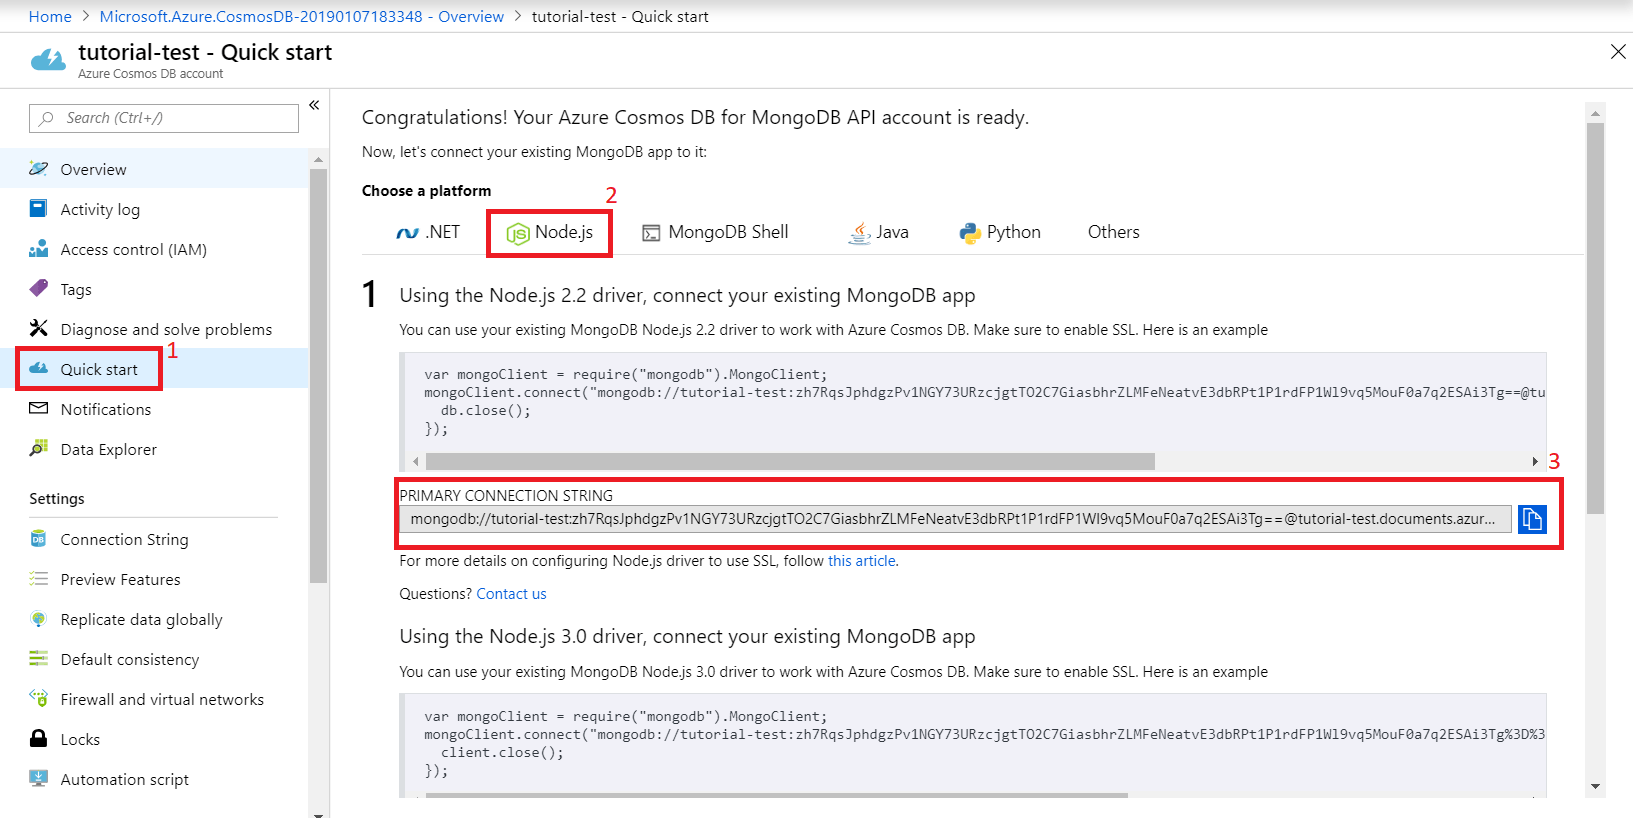 Azure Cosmos DB Primary Connection String